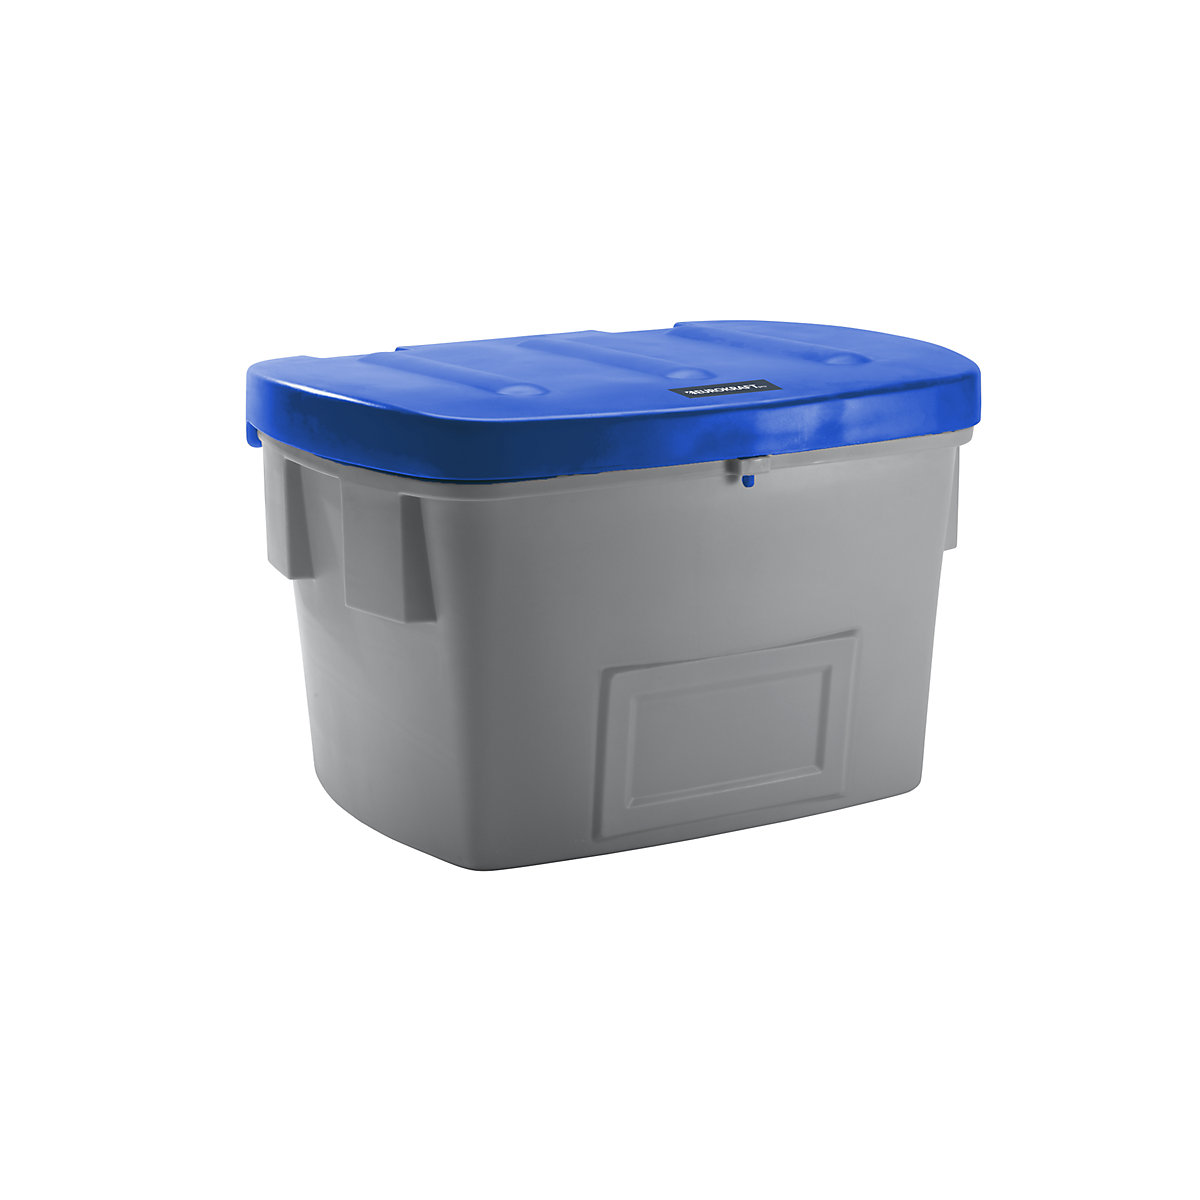 Universal / grit container – eurokraft pro, without dispenser opening, 700 l, blue lid-6